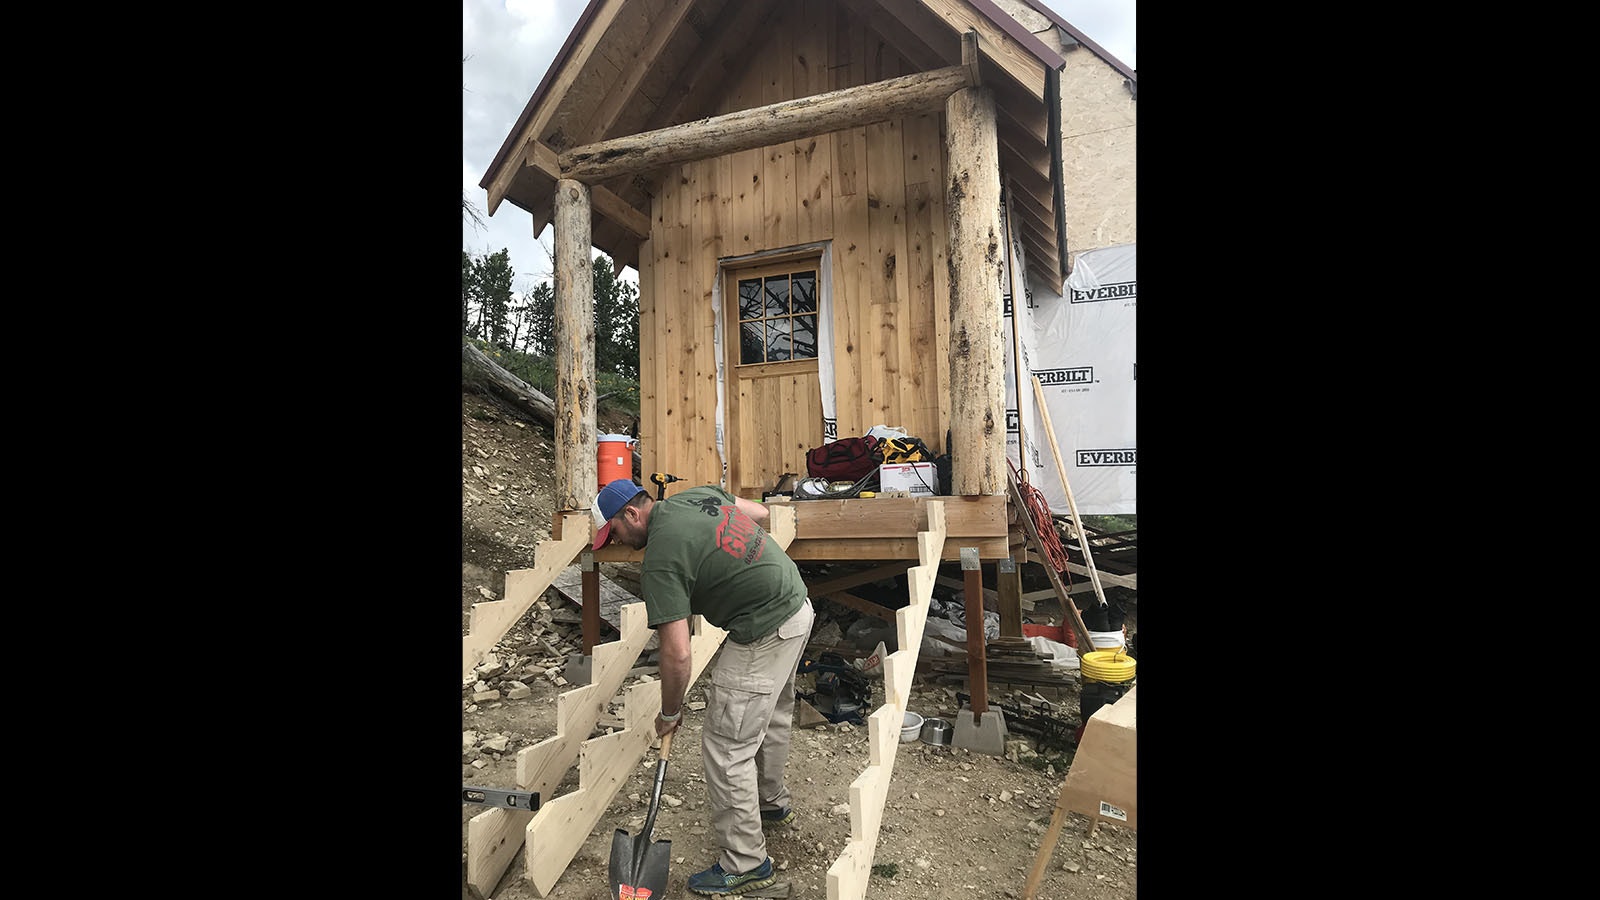 Front porch construction underway at Cody Letteire’s off-grid mountain cabin near Dubois.